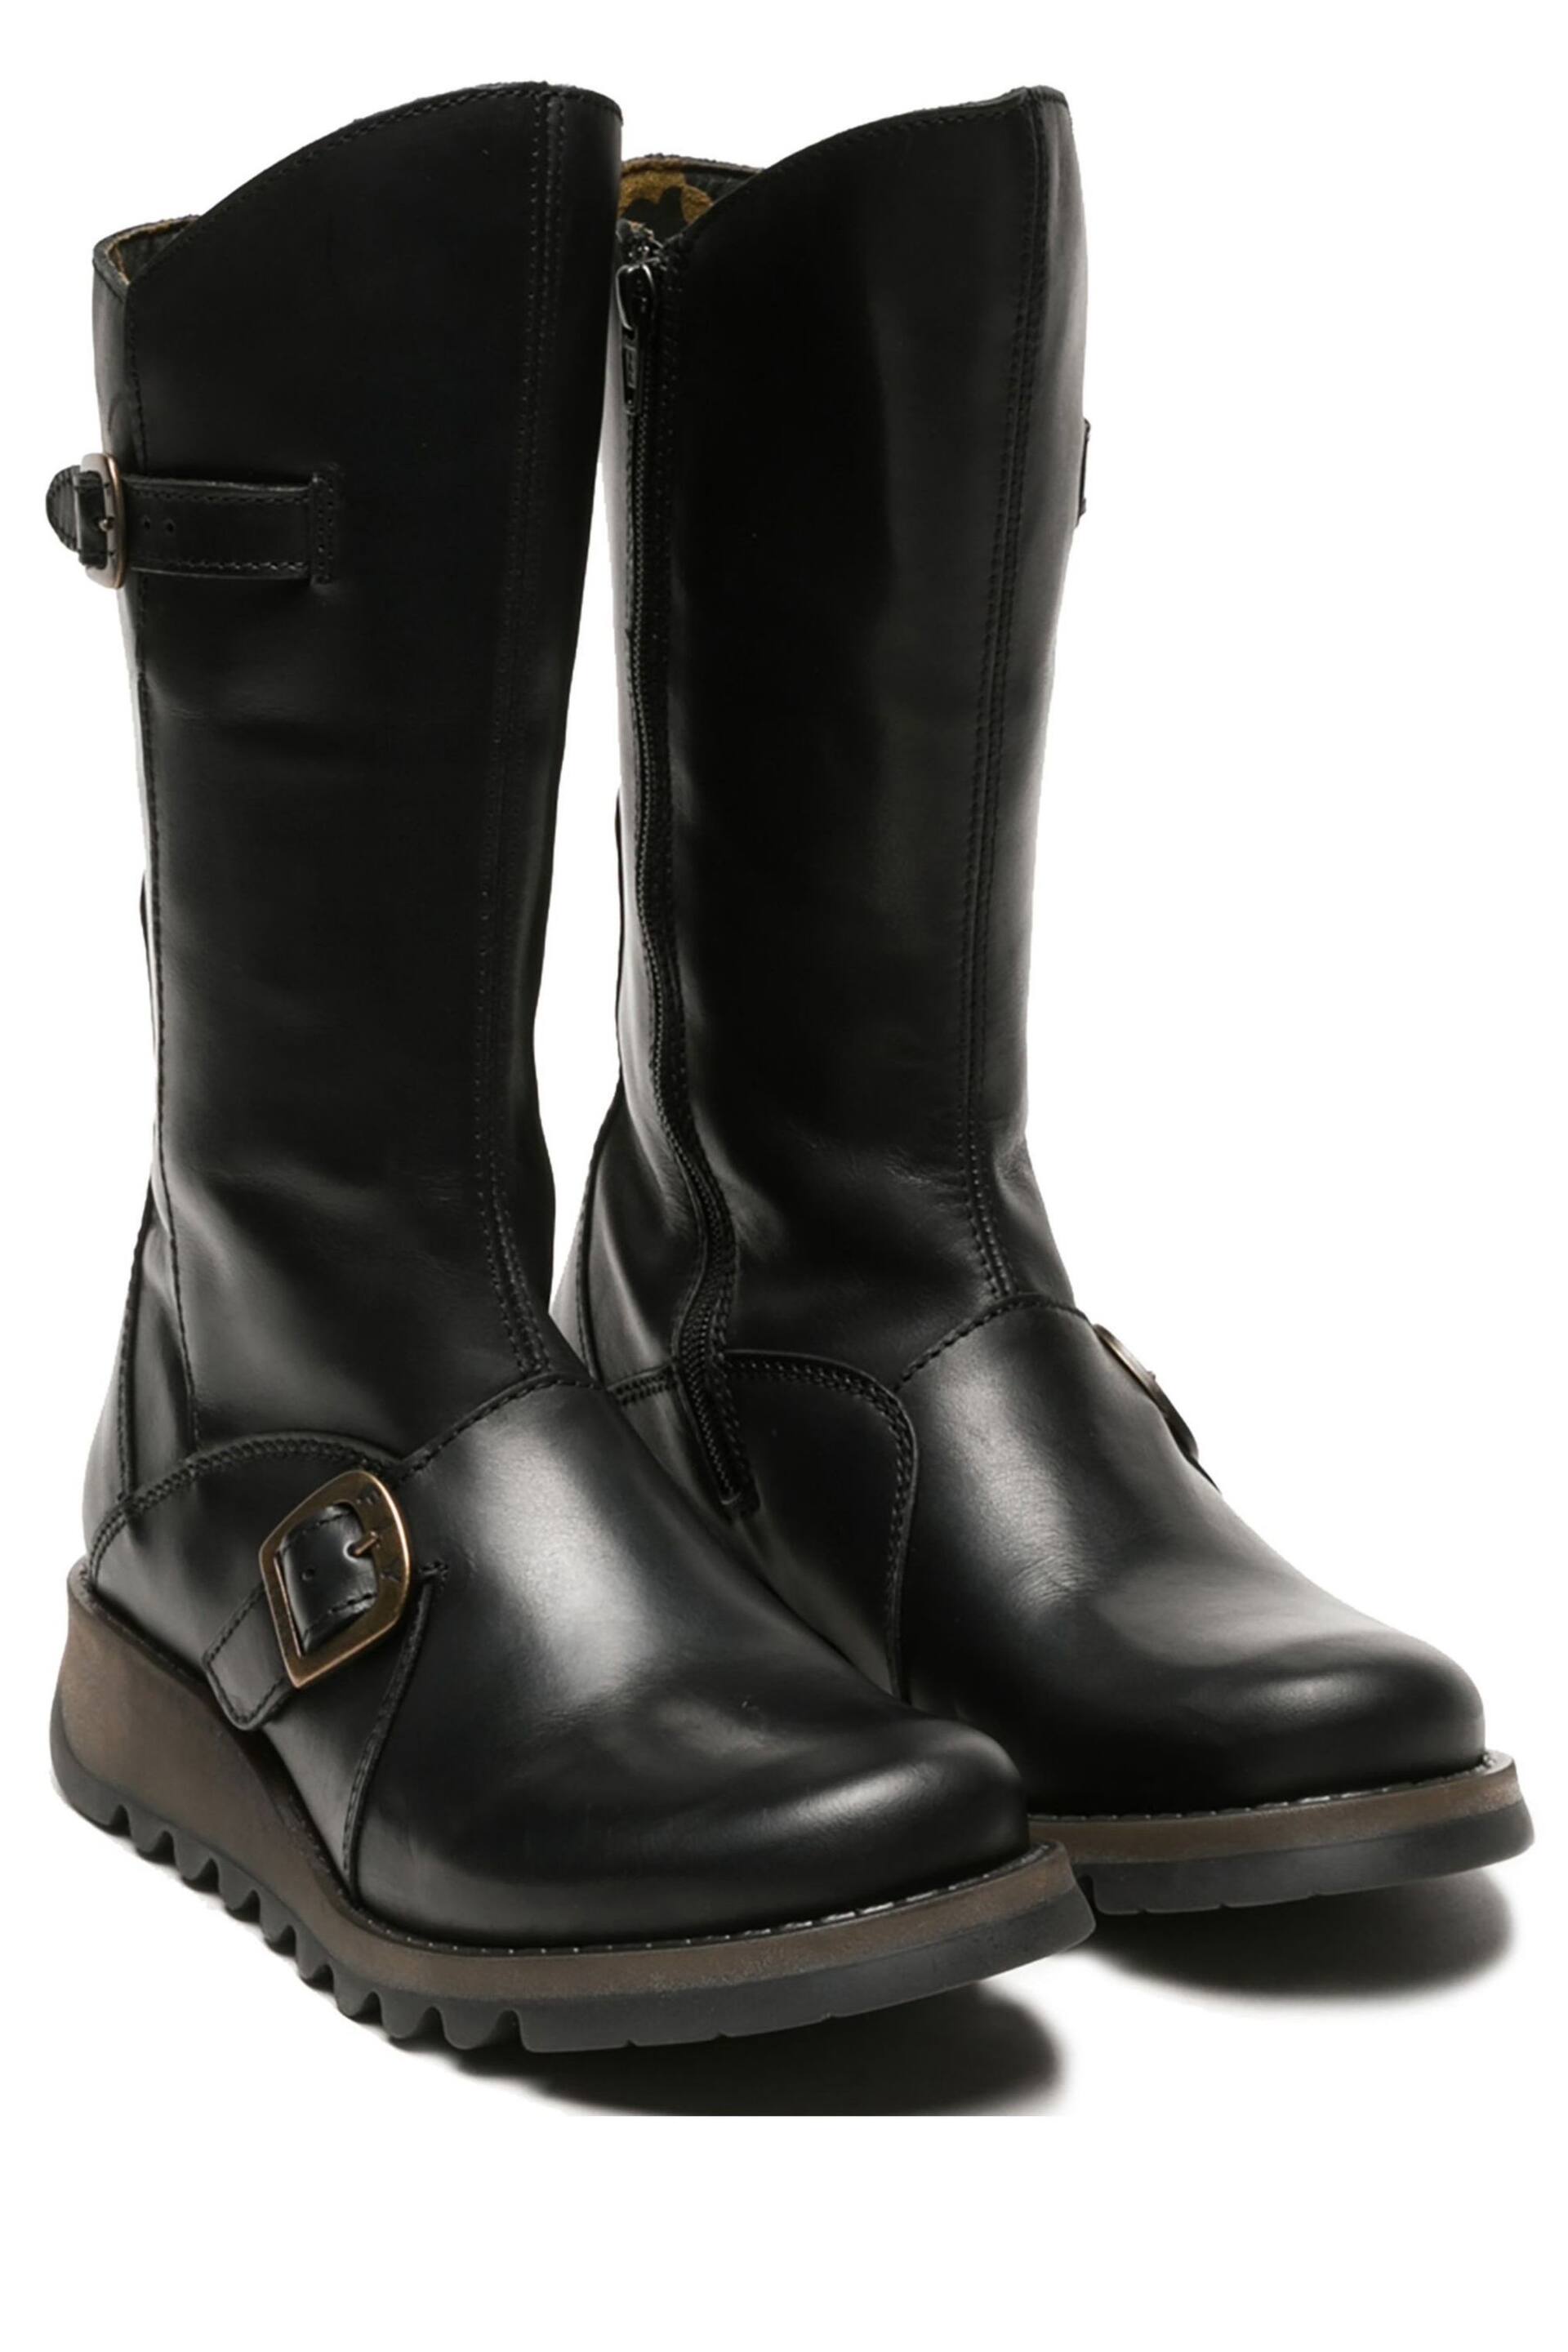 Fly London Mid Calf Boots - Image 3 of 4